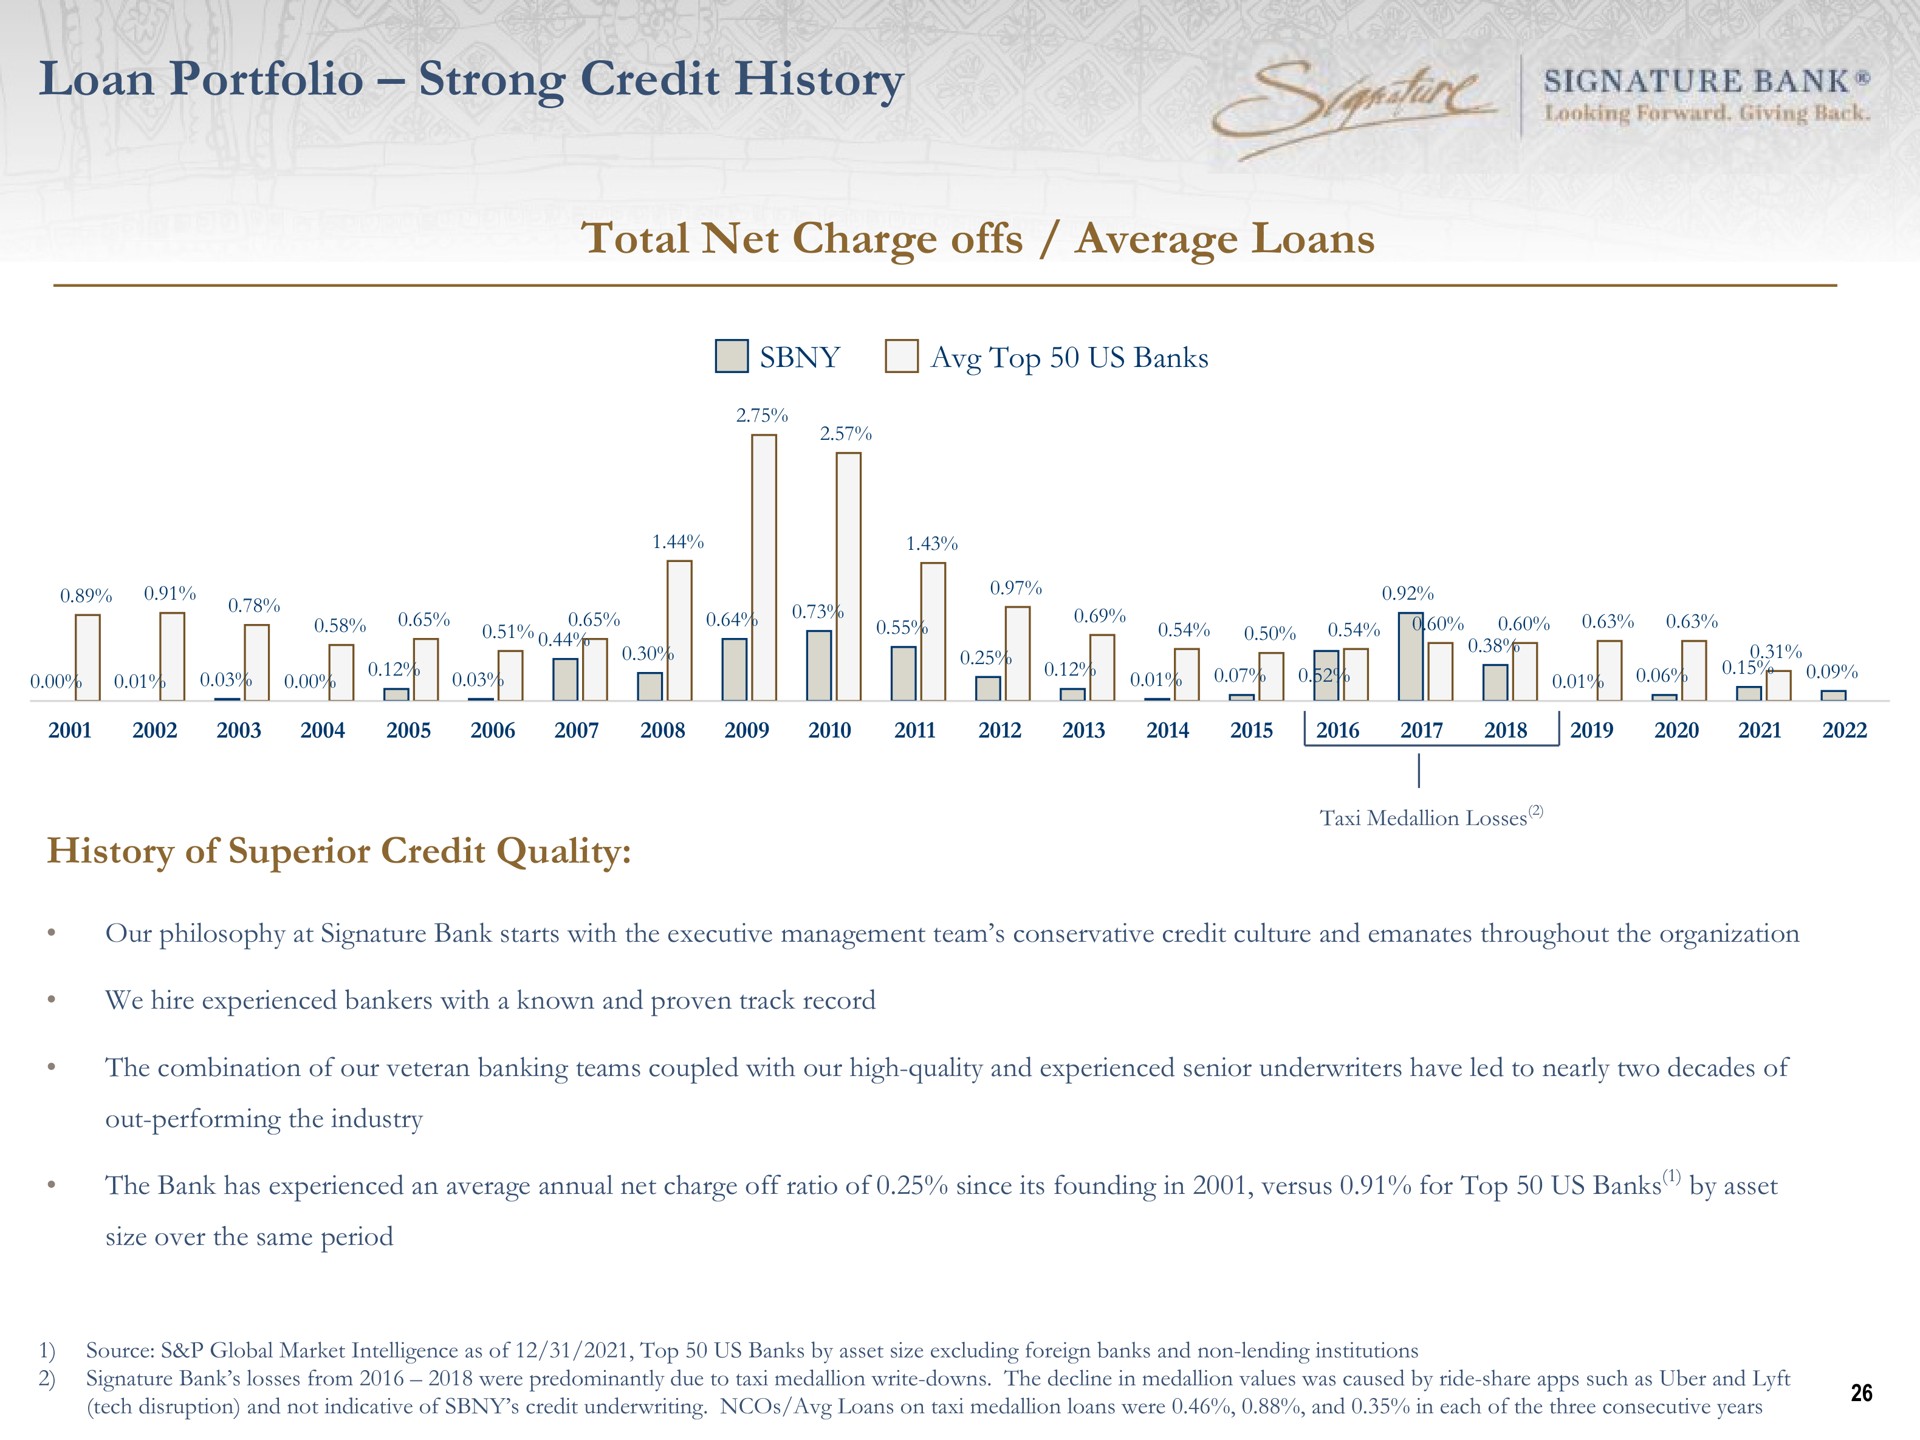 loan portfolio strong credit history total net charge offs average loans signature bank top us banks of superior quality | Signature Bank